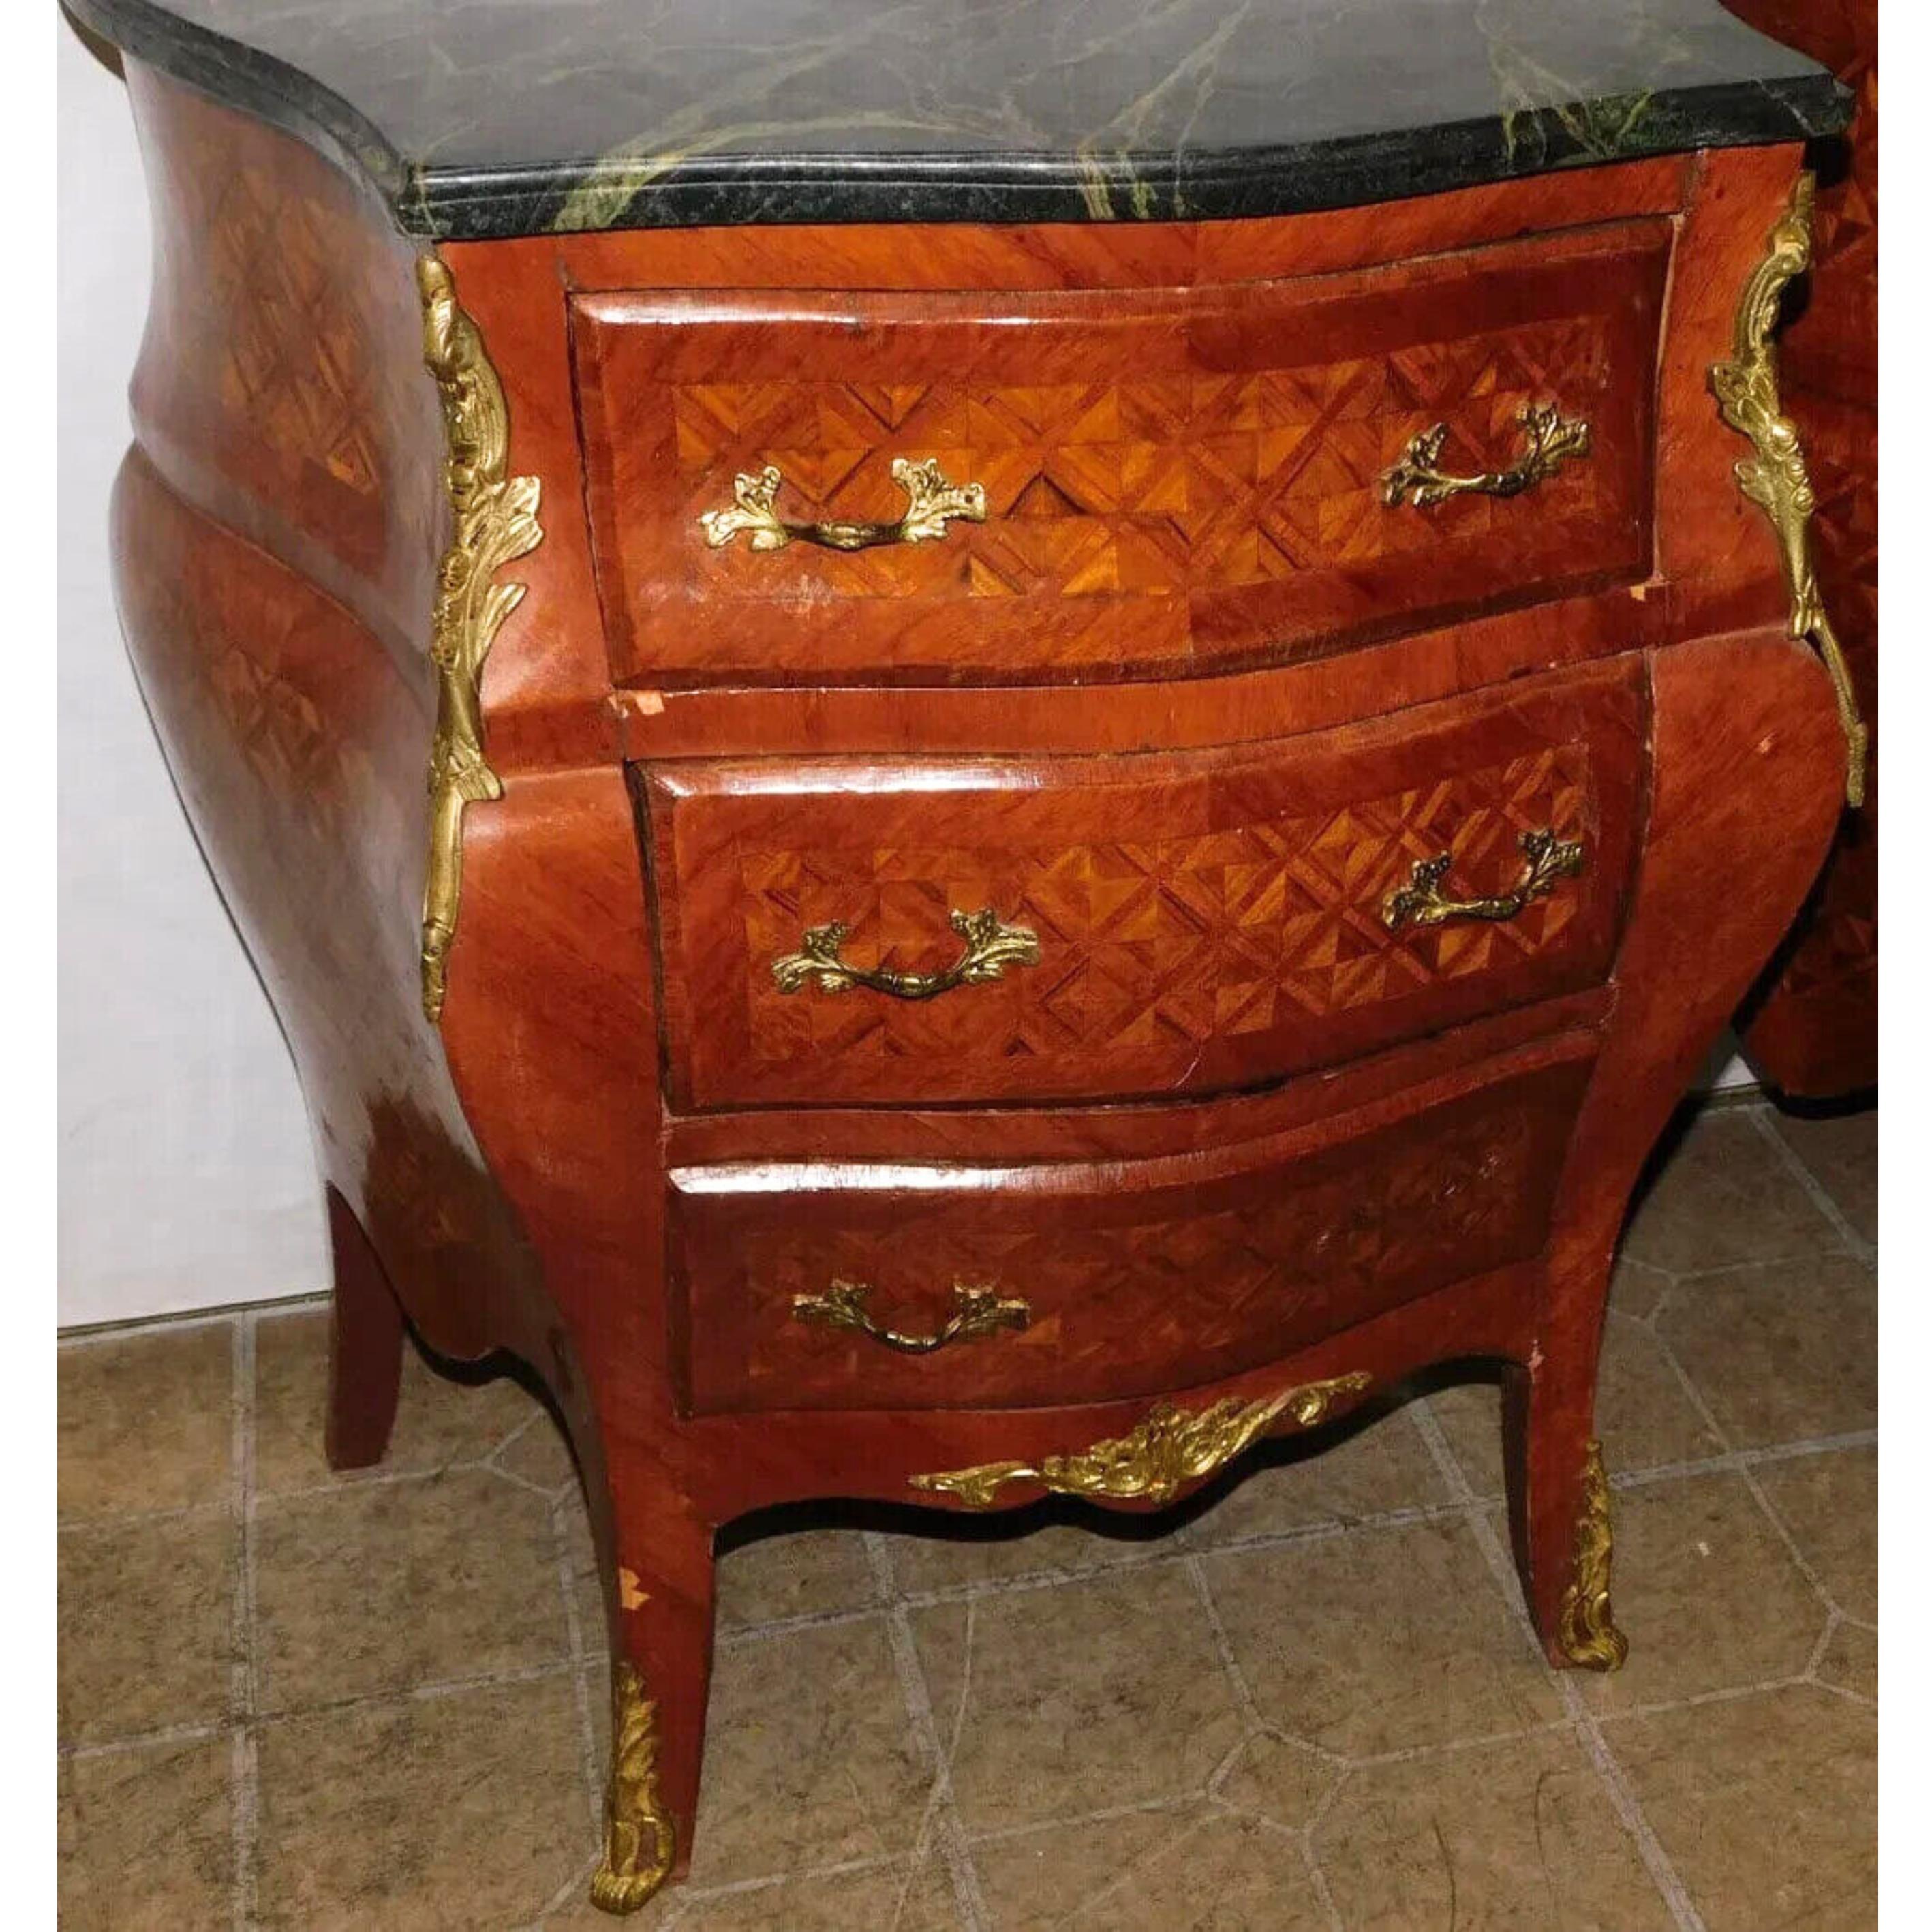 Gorgeous Pair of 20th C. Walnut Inlay, Marble Top, Diminutive, With Bronze  Mounts Commodes, Set of Two!

Commodes, Pair, Walnut Inlay, Marble Top, Diminutive, With Bronze Mounts!!

Add a touch of sophistication to your bedroom or guestroom with